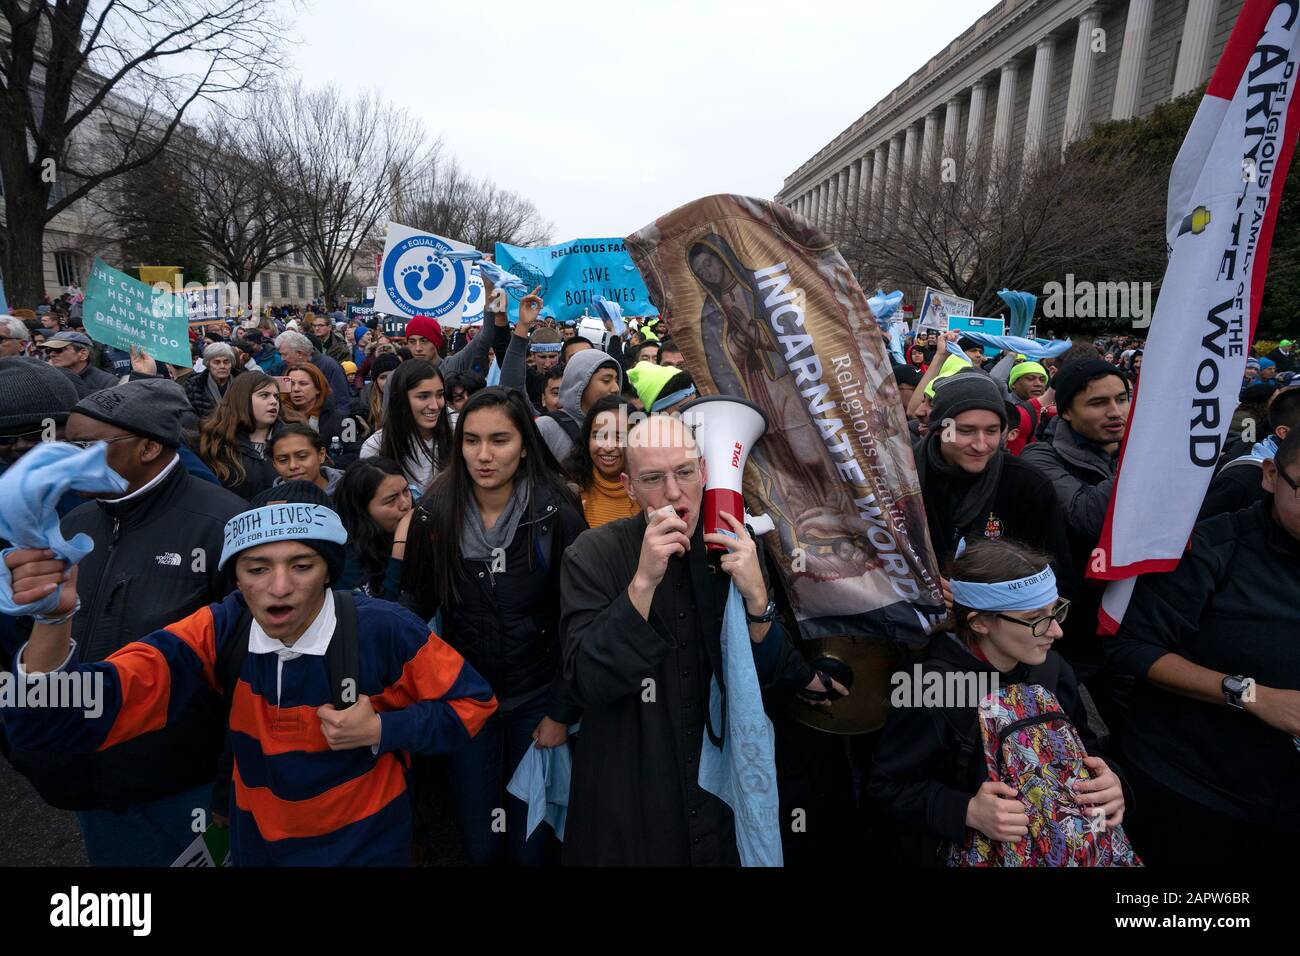 Washington DC, USA. 24th Jan, 2020. People gather for the March for Life on the National Mall in Washington, DC, U.S., on Friday, January 24, 2020. Credit: MediaPunch Inc/Alamy Live News Stock Photo